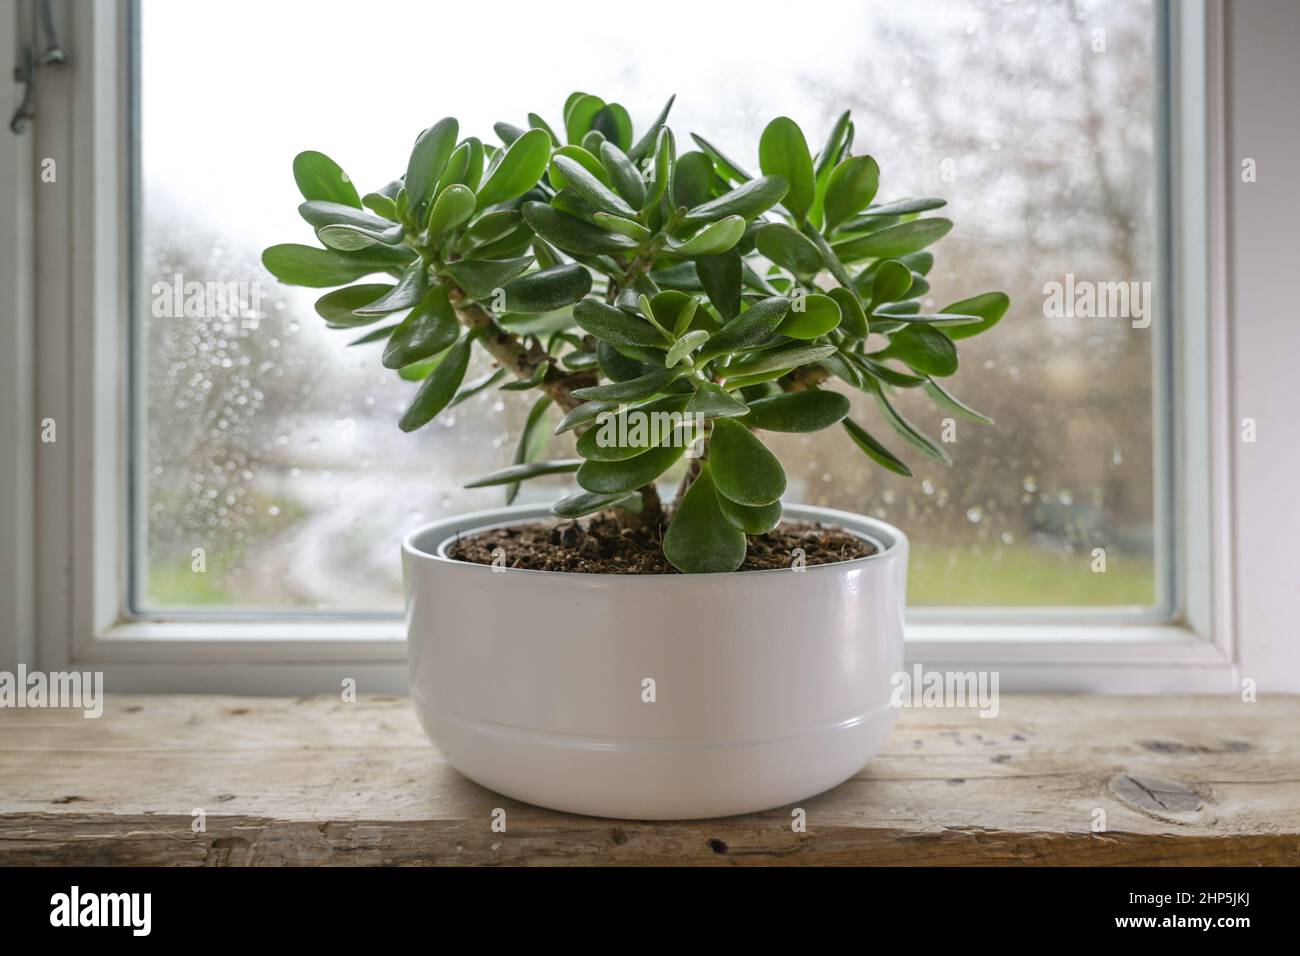 Crassula ovata, known as lucky plant or money tree in a white pot in front of a window on a rainy day, selected focus, narrow depth of field Stock Photo